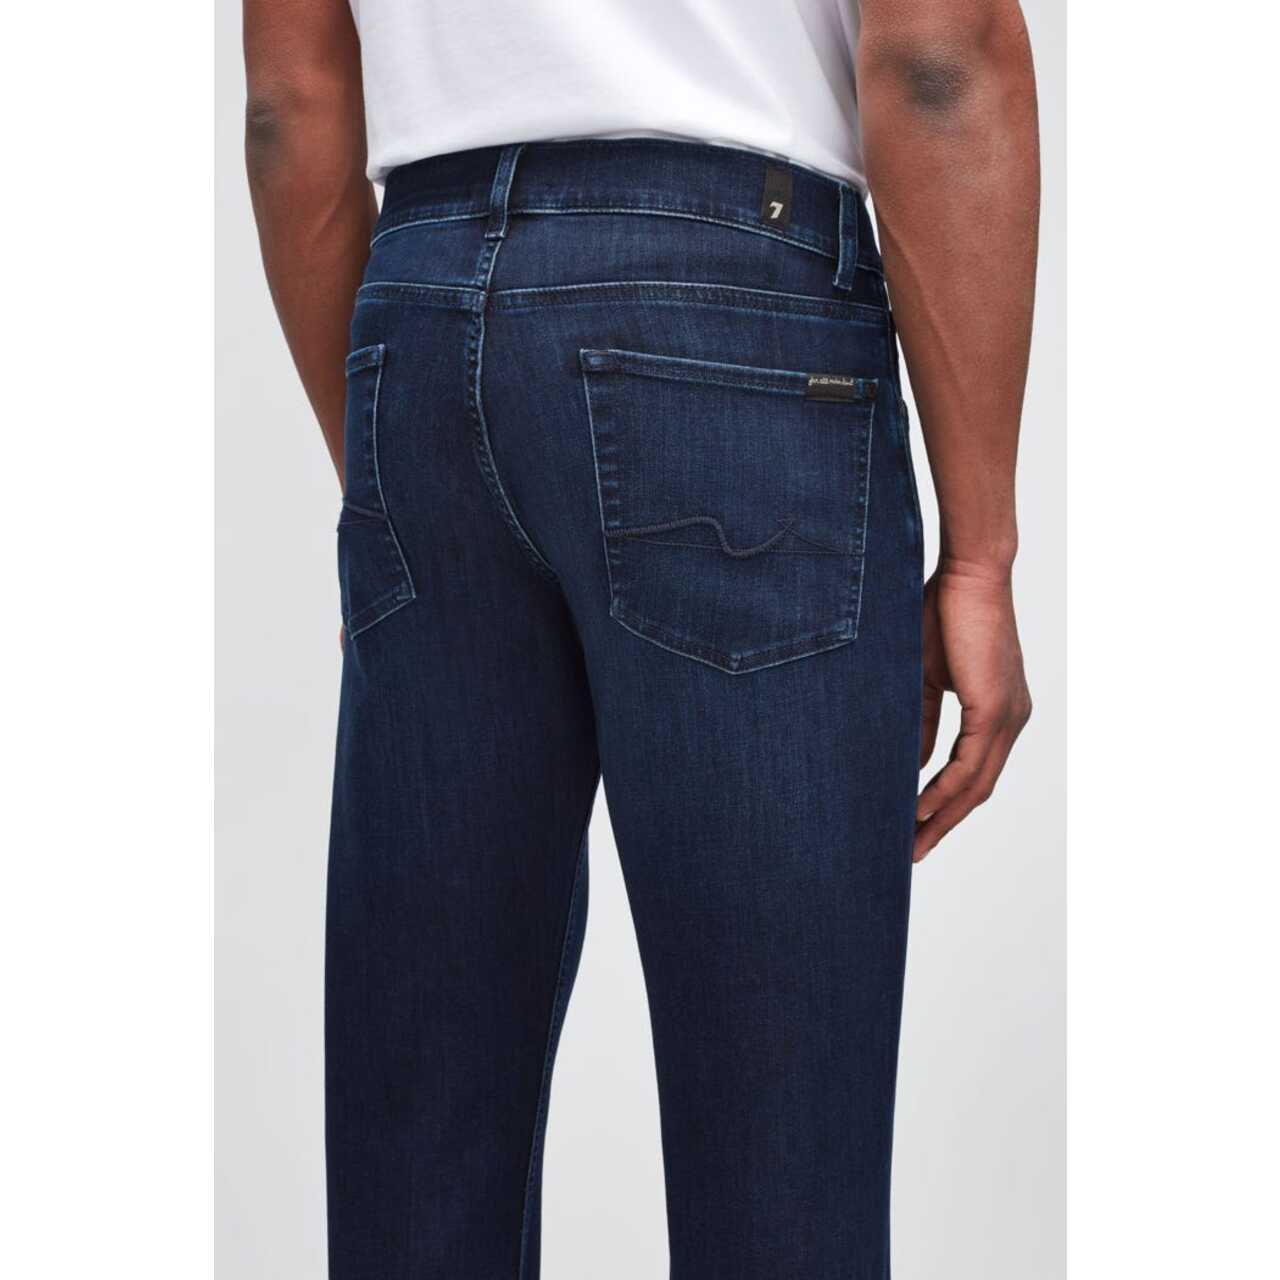 7 FOR ALL MANKIND - JEANS / SLIMMY LUXE PERFORMANCE ECO